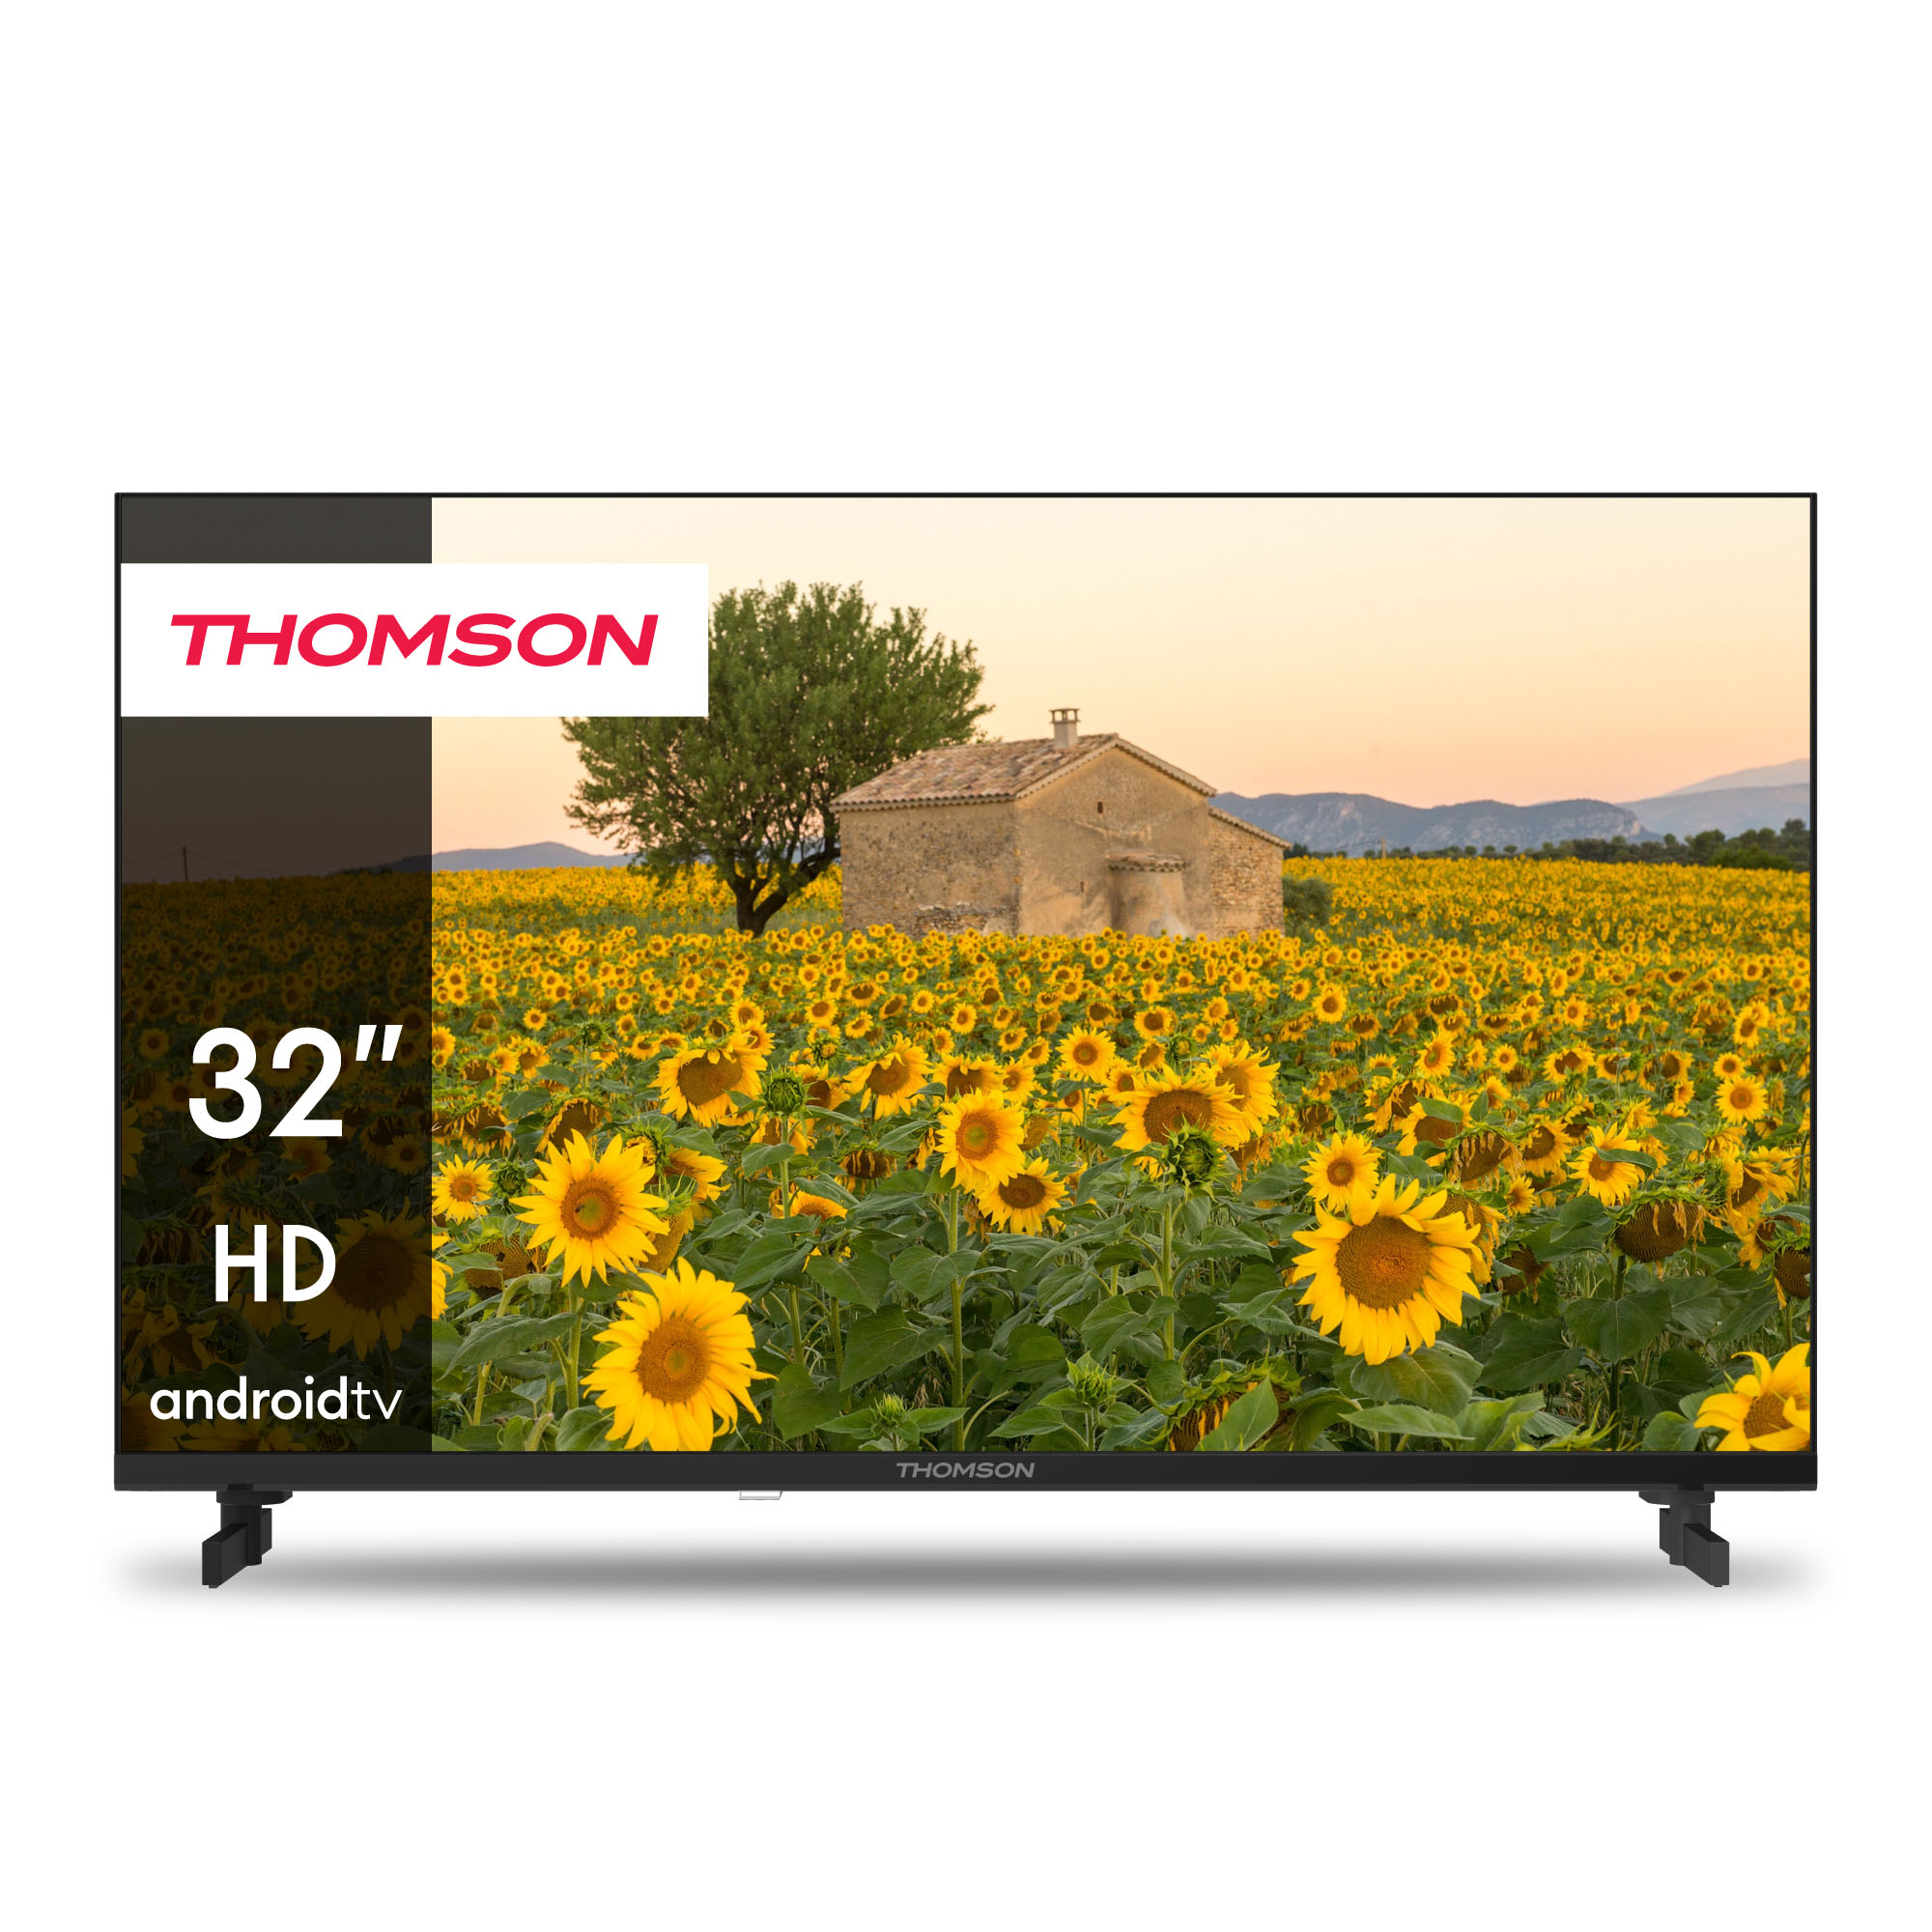 Thomson Android TV HD